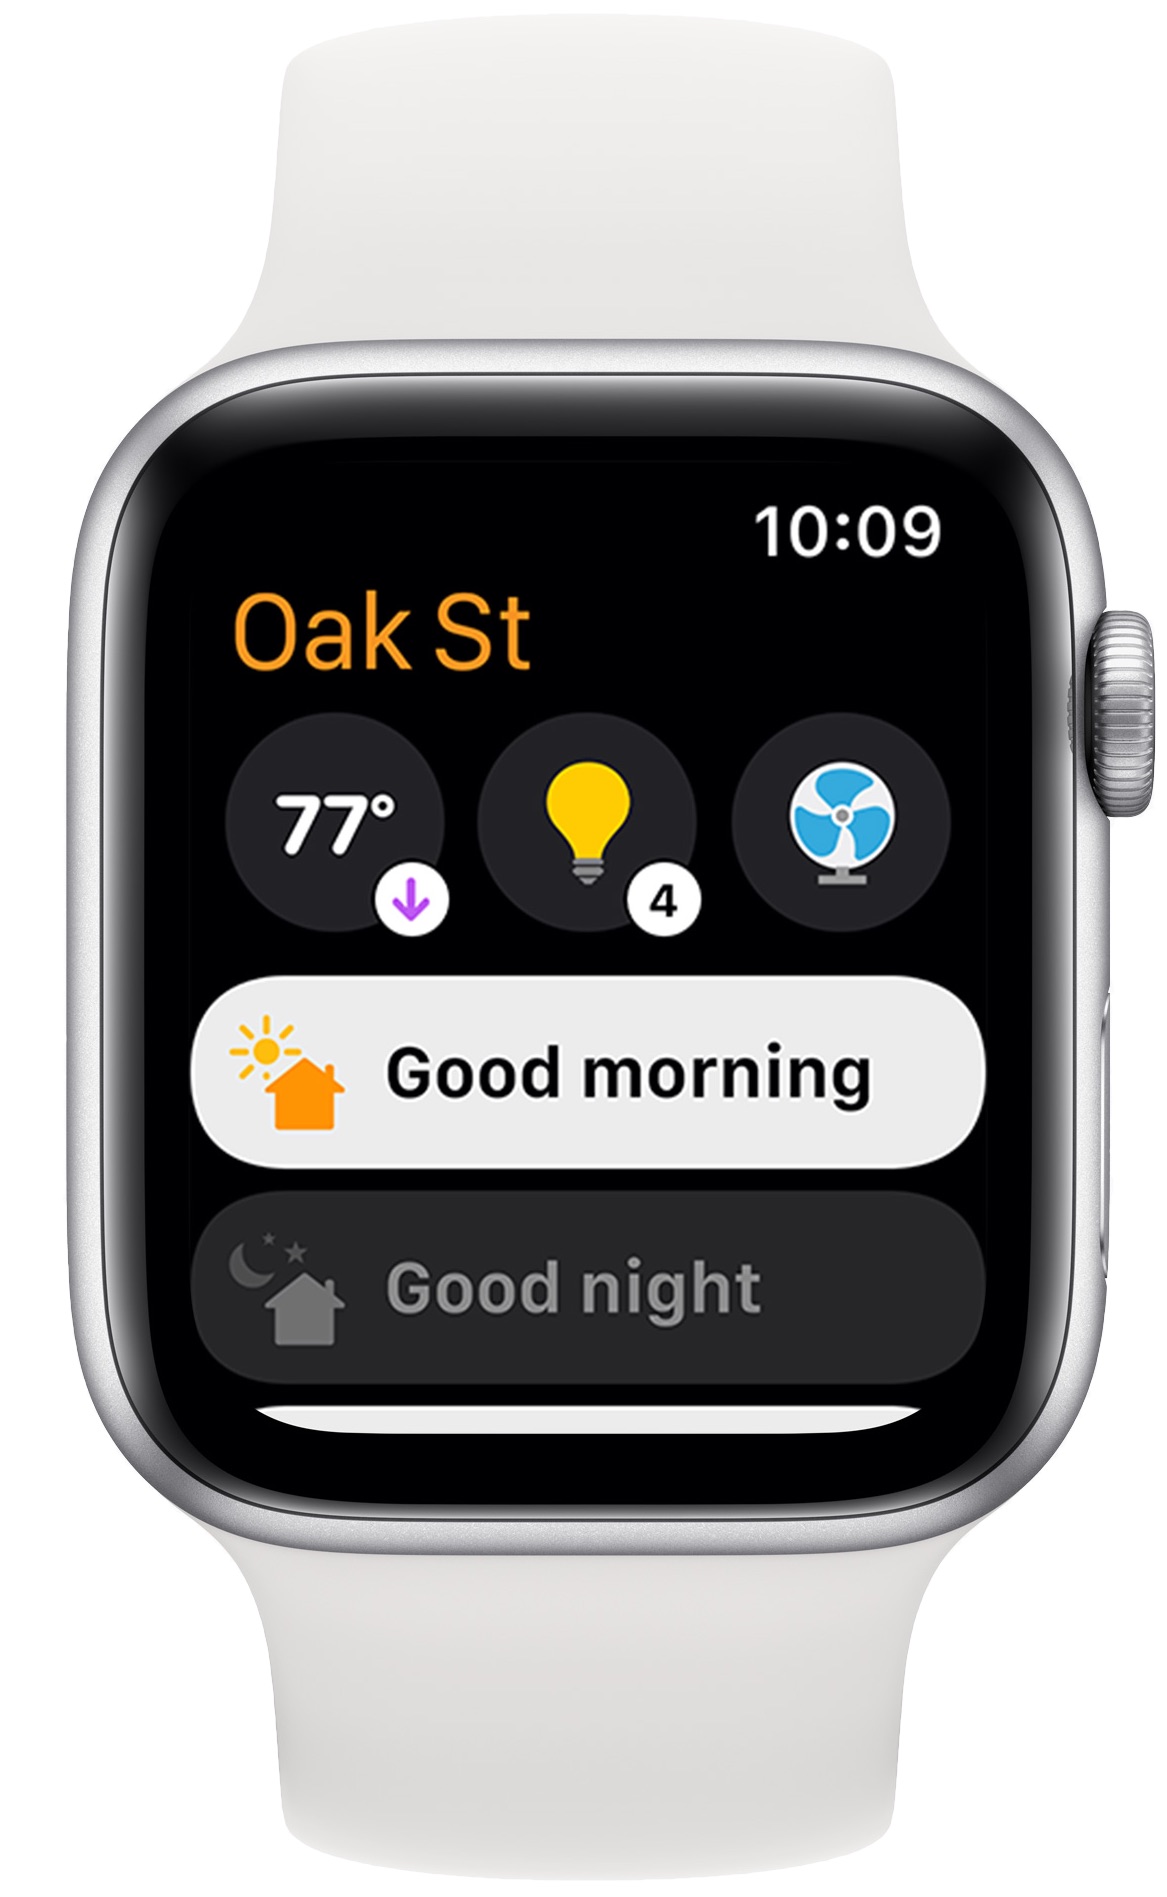 The redesigned Home app on watchOS 8 shown running on Apple Watch, showing convenient access to HomeKit scenes and accessories